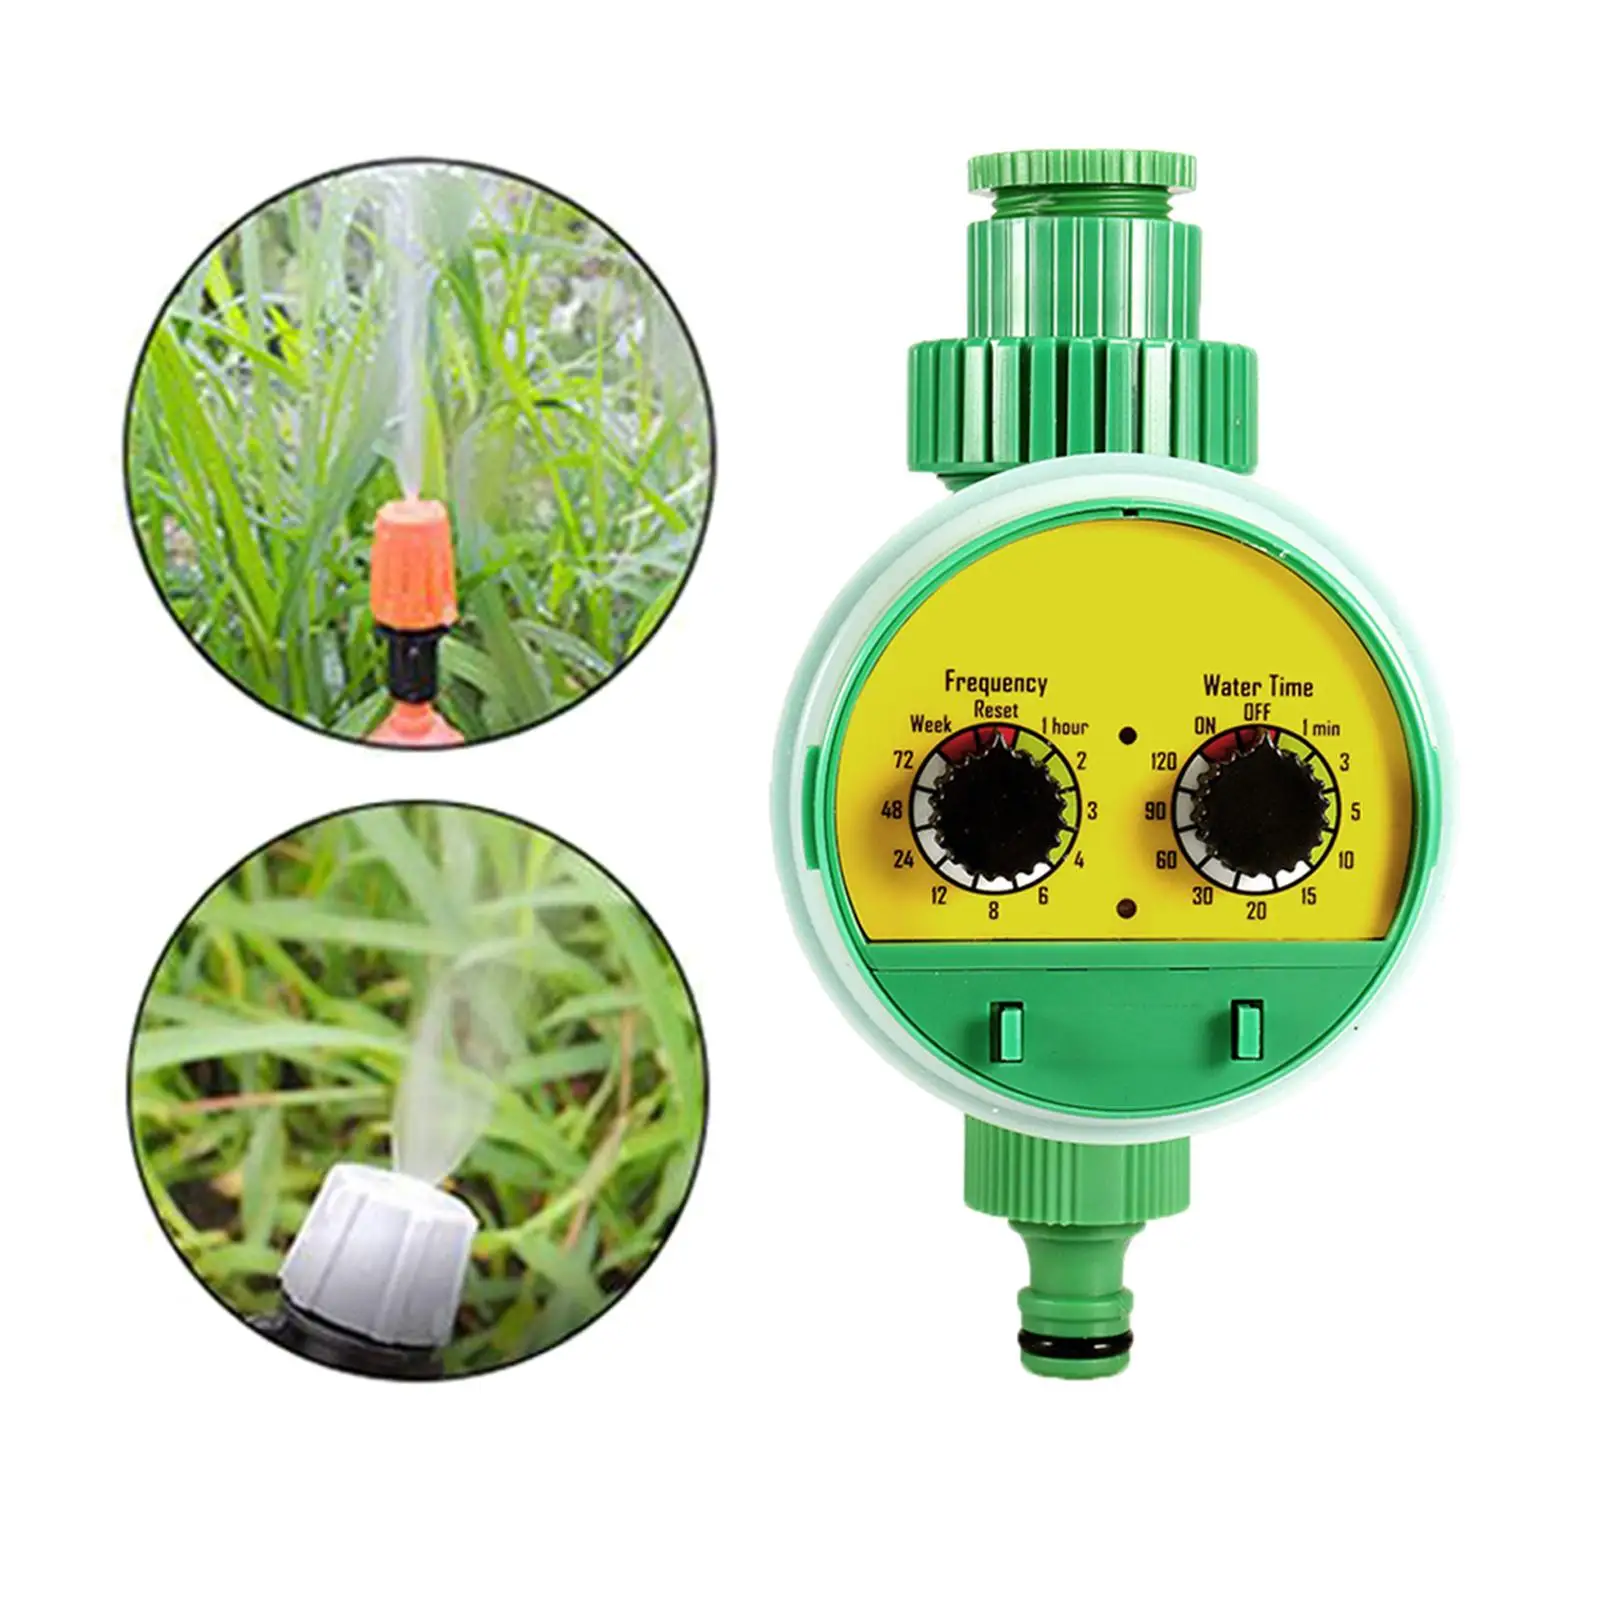 Watering Timer with LCD Display Irrigation System Intelligence Valve Waterproof Automatic Device Watering Control for Outdoor